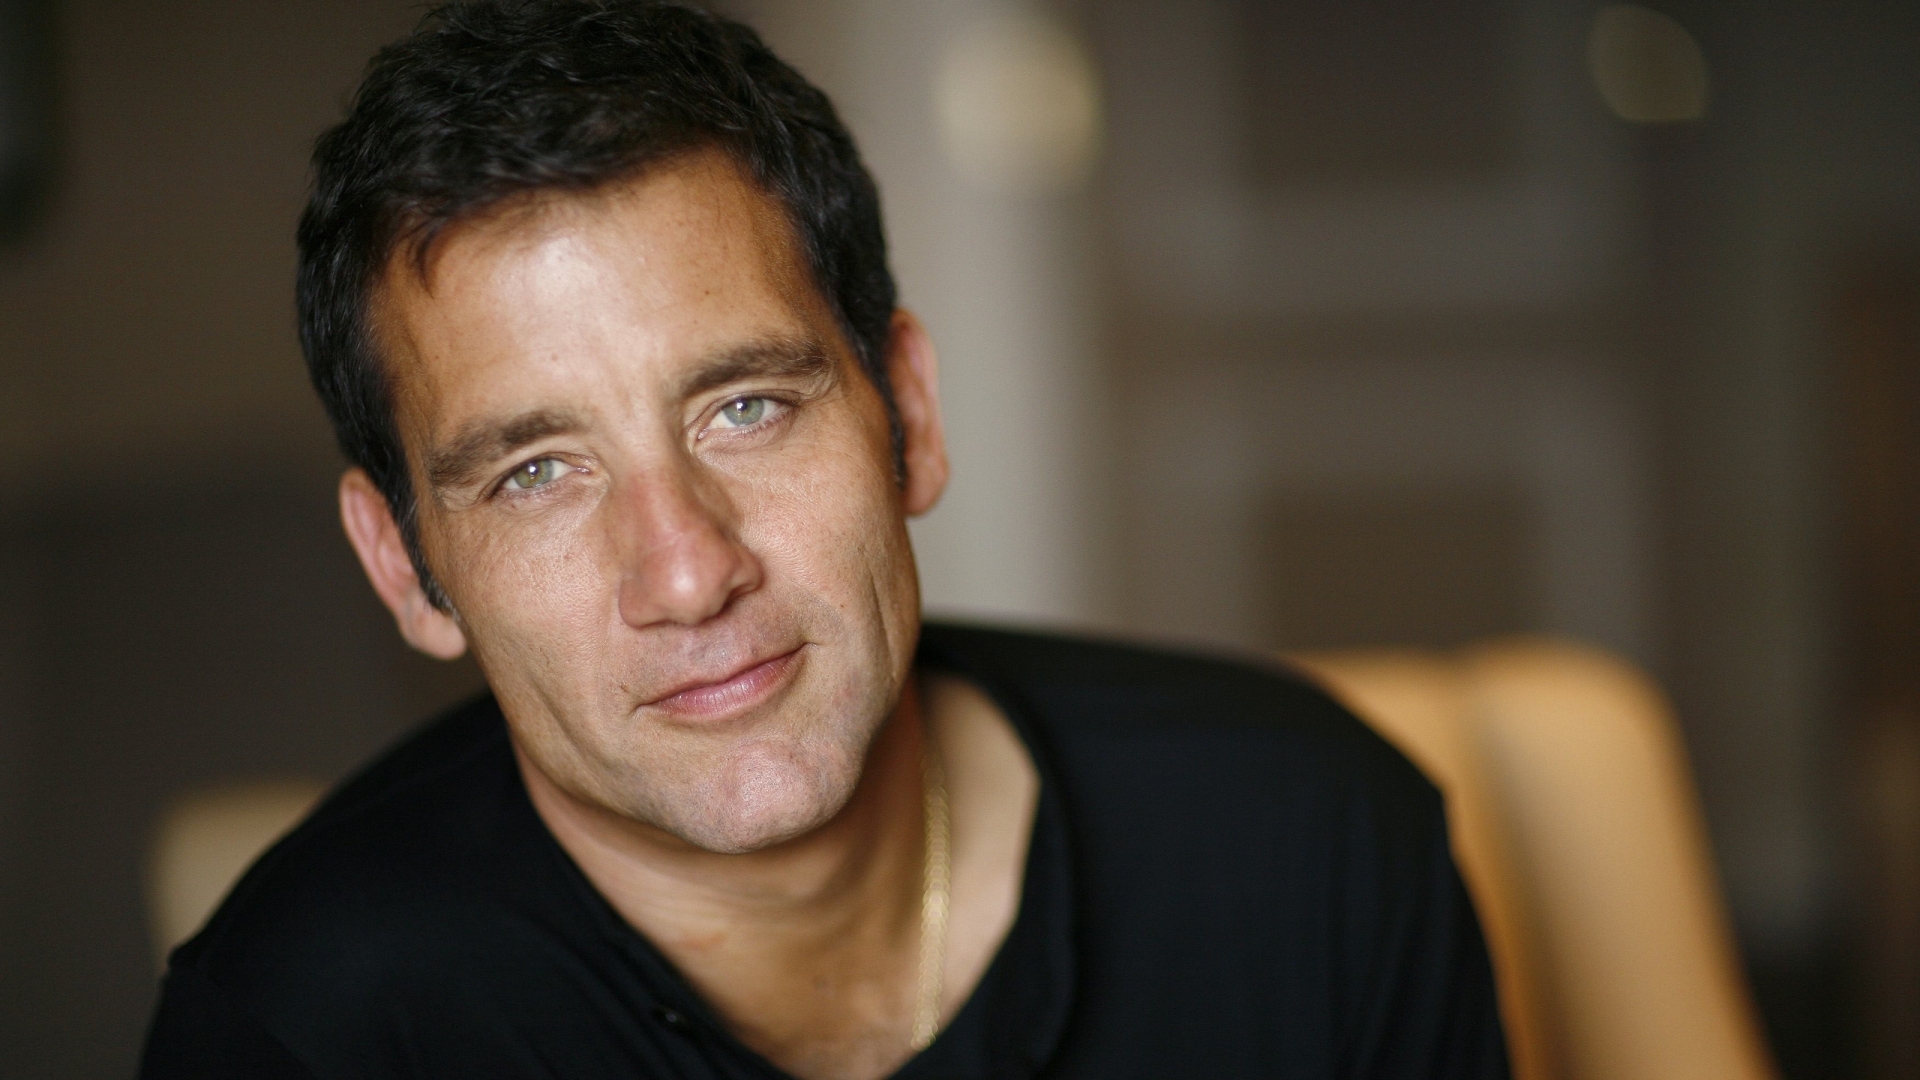 Clive Owen Smile for 1920 x 1080 HDTV 1080p resolution